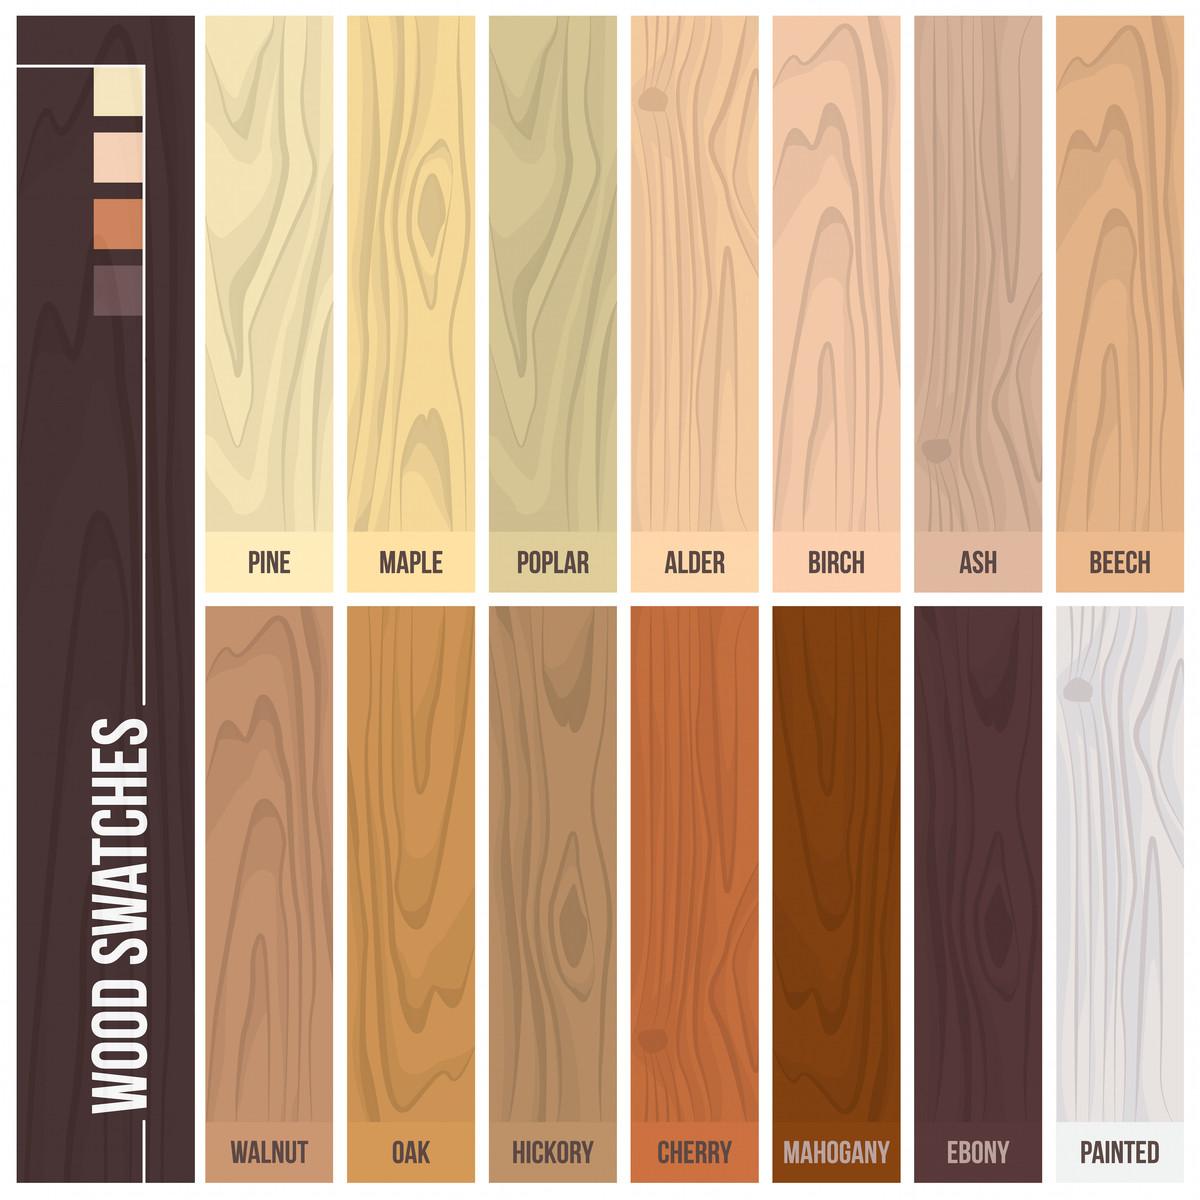 28 Fantastic Hickory Hardwood Flooring Prices 2024 free download hickory hardwood flooring prices of 12 types of hardwood flooring species styles edging dimensions within types of hardwood flooring illustrated guide